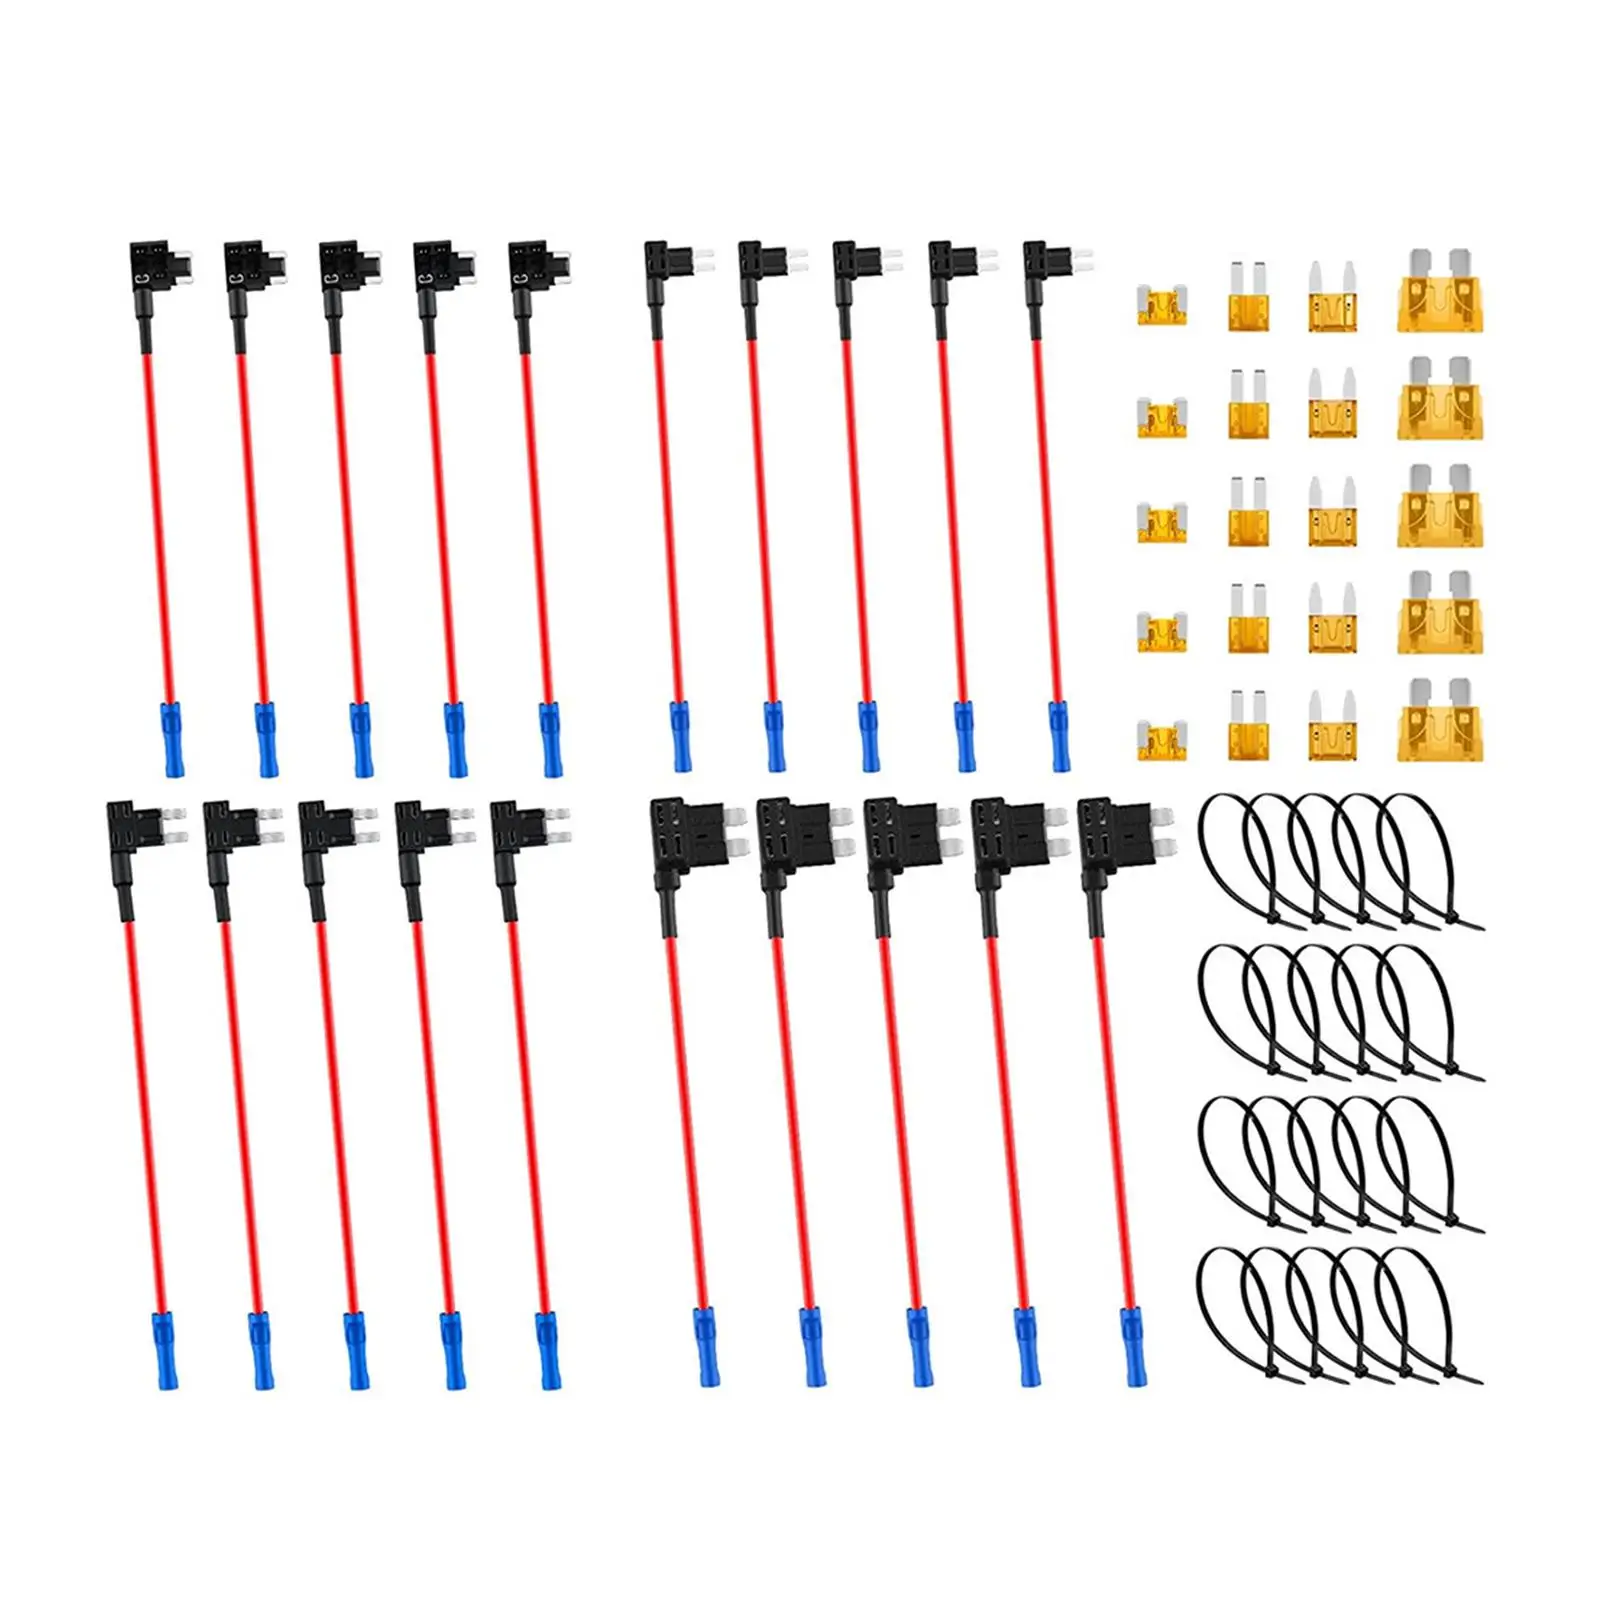 20x Car Add A Circuit Fuse Tap Adapter Set Spare Parts Direct Replaces Dual Slot Fuse Holders Durable for Electronic Device